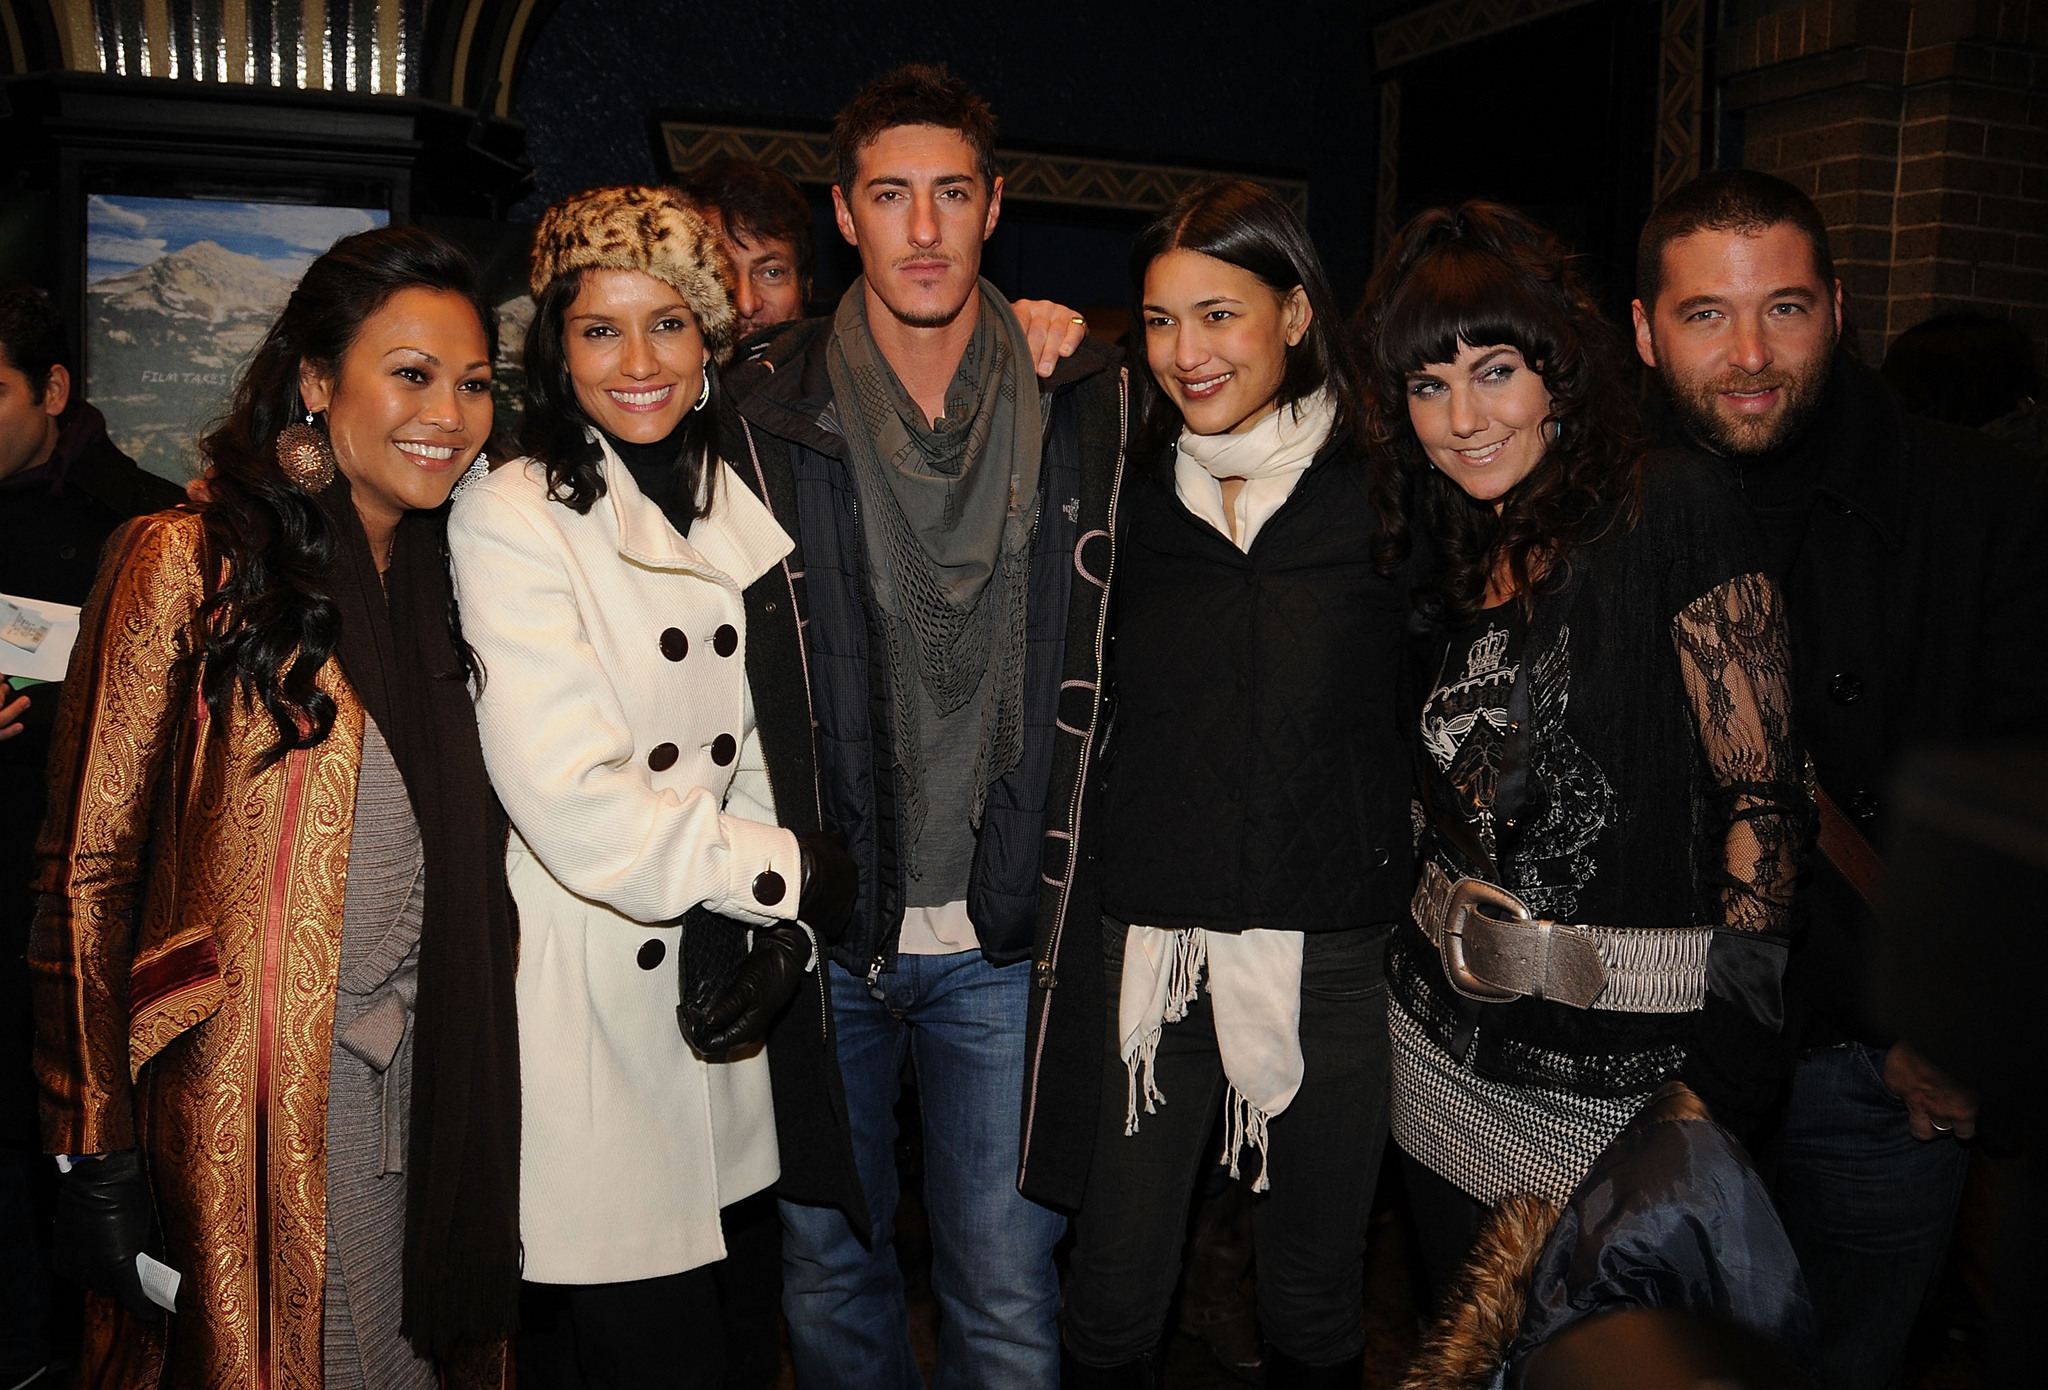 Eric Balfour, David Grieco and Andrea Fellers at event of Hell Ride (2008)